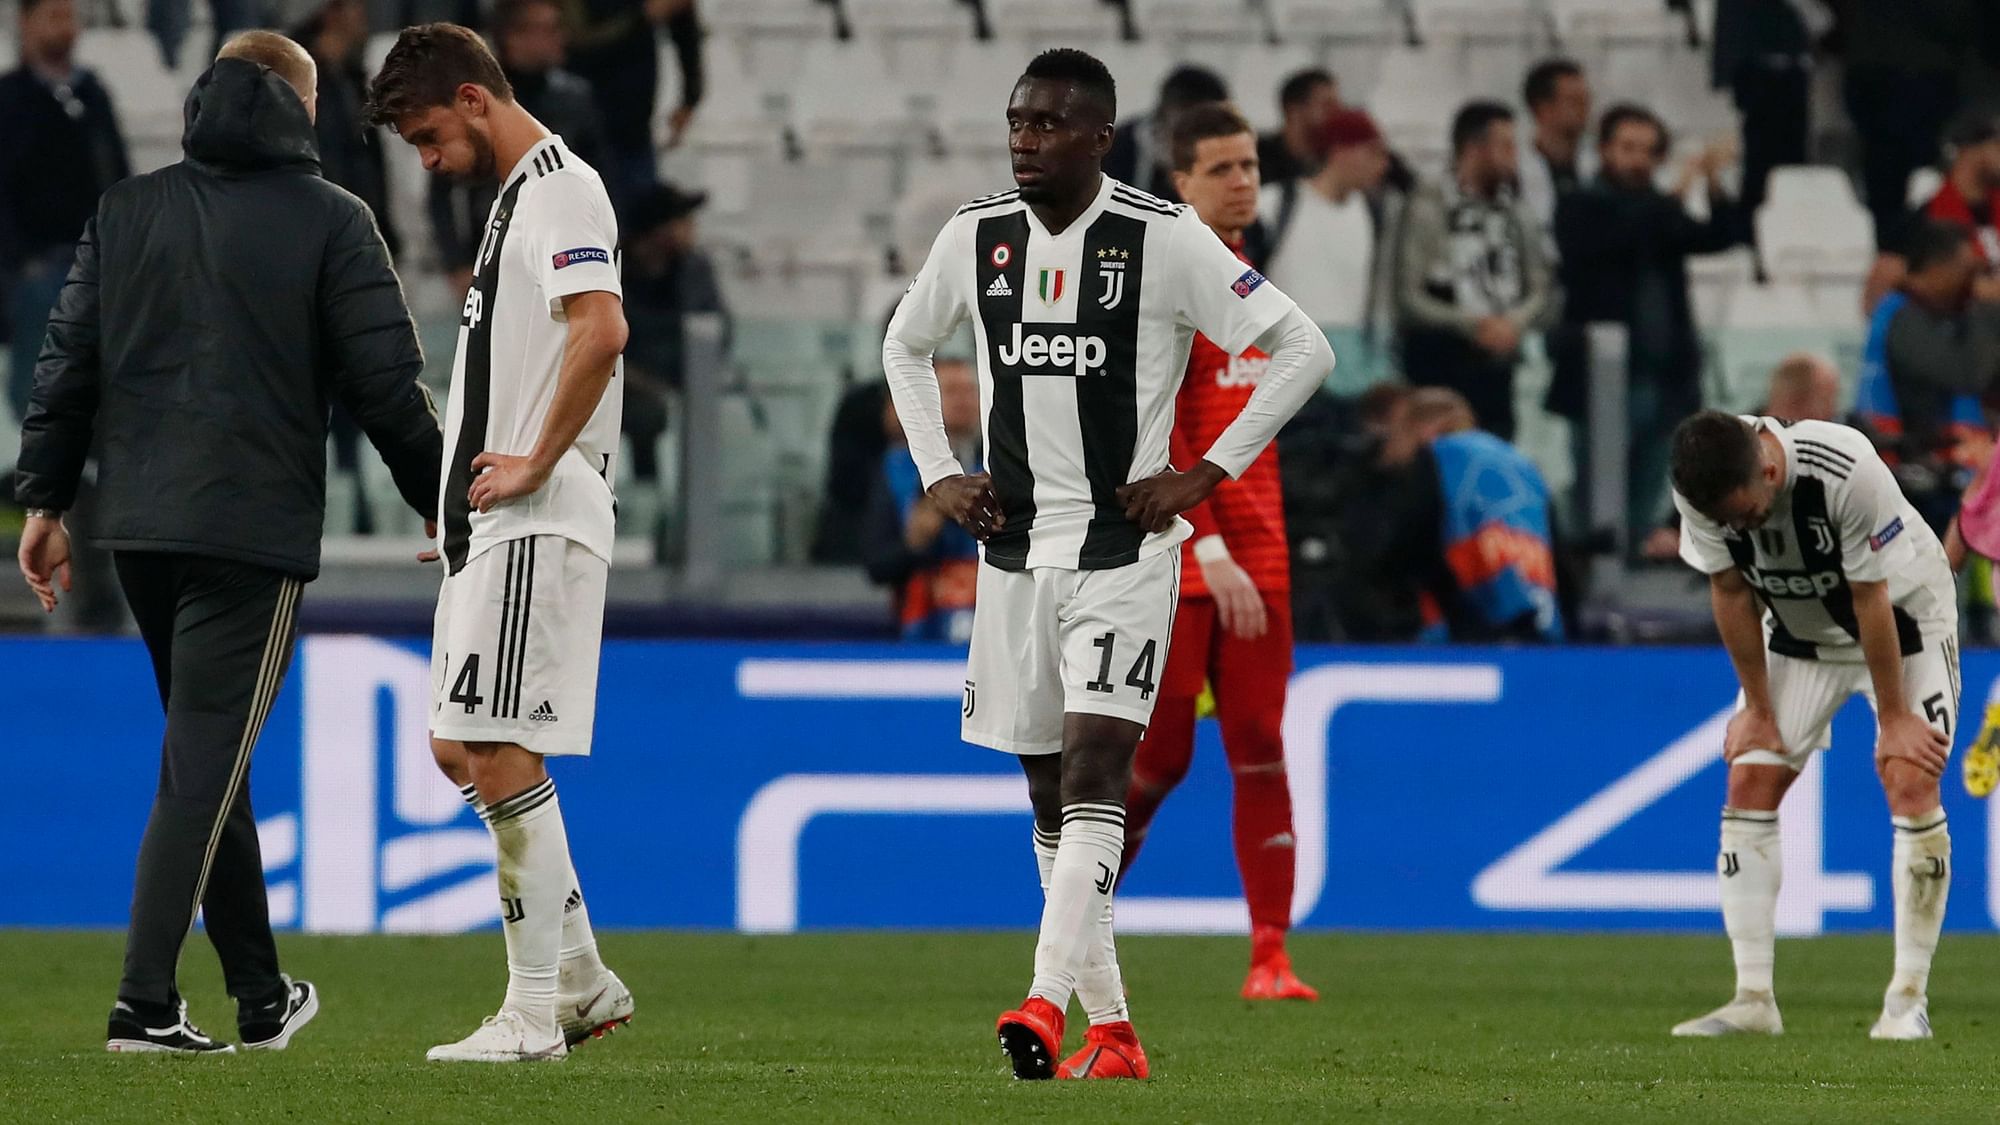 Juventus who were leading by a goal in the first half had to face severe repercussions because of their fallback strategy.